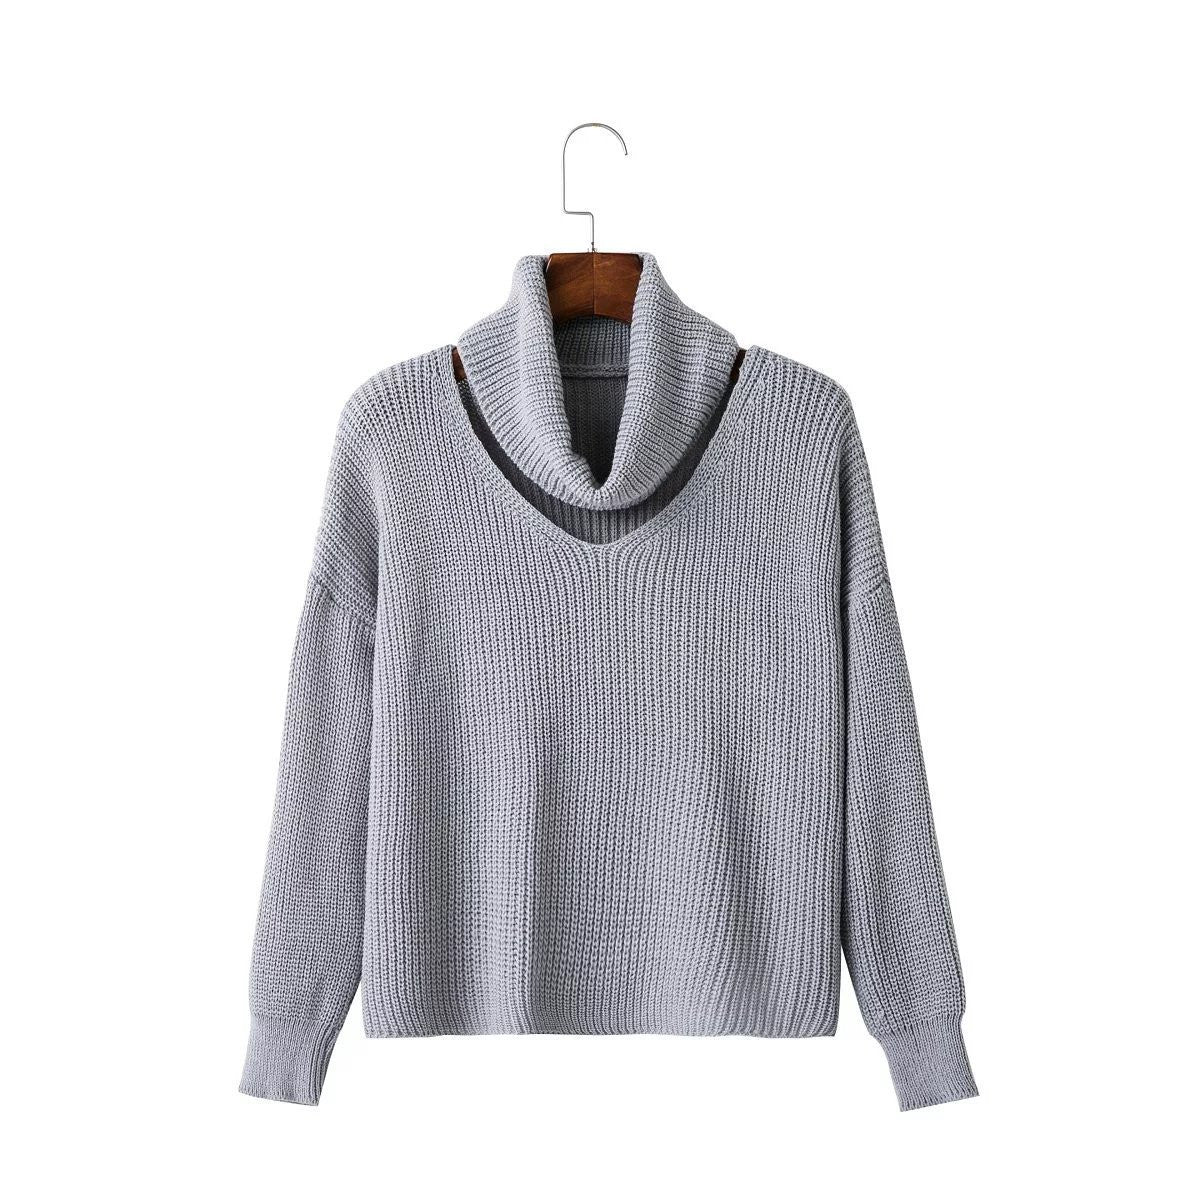 Fashion High Neck Hollow Out Pullover Knitting Sweater